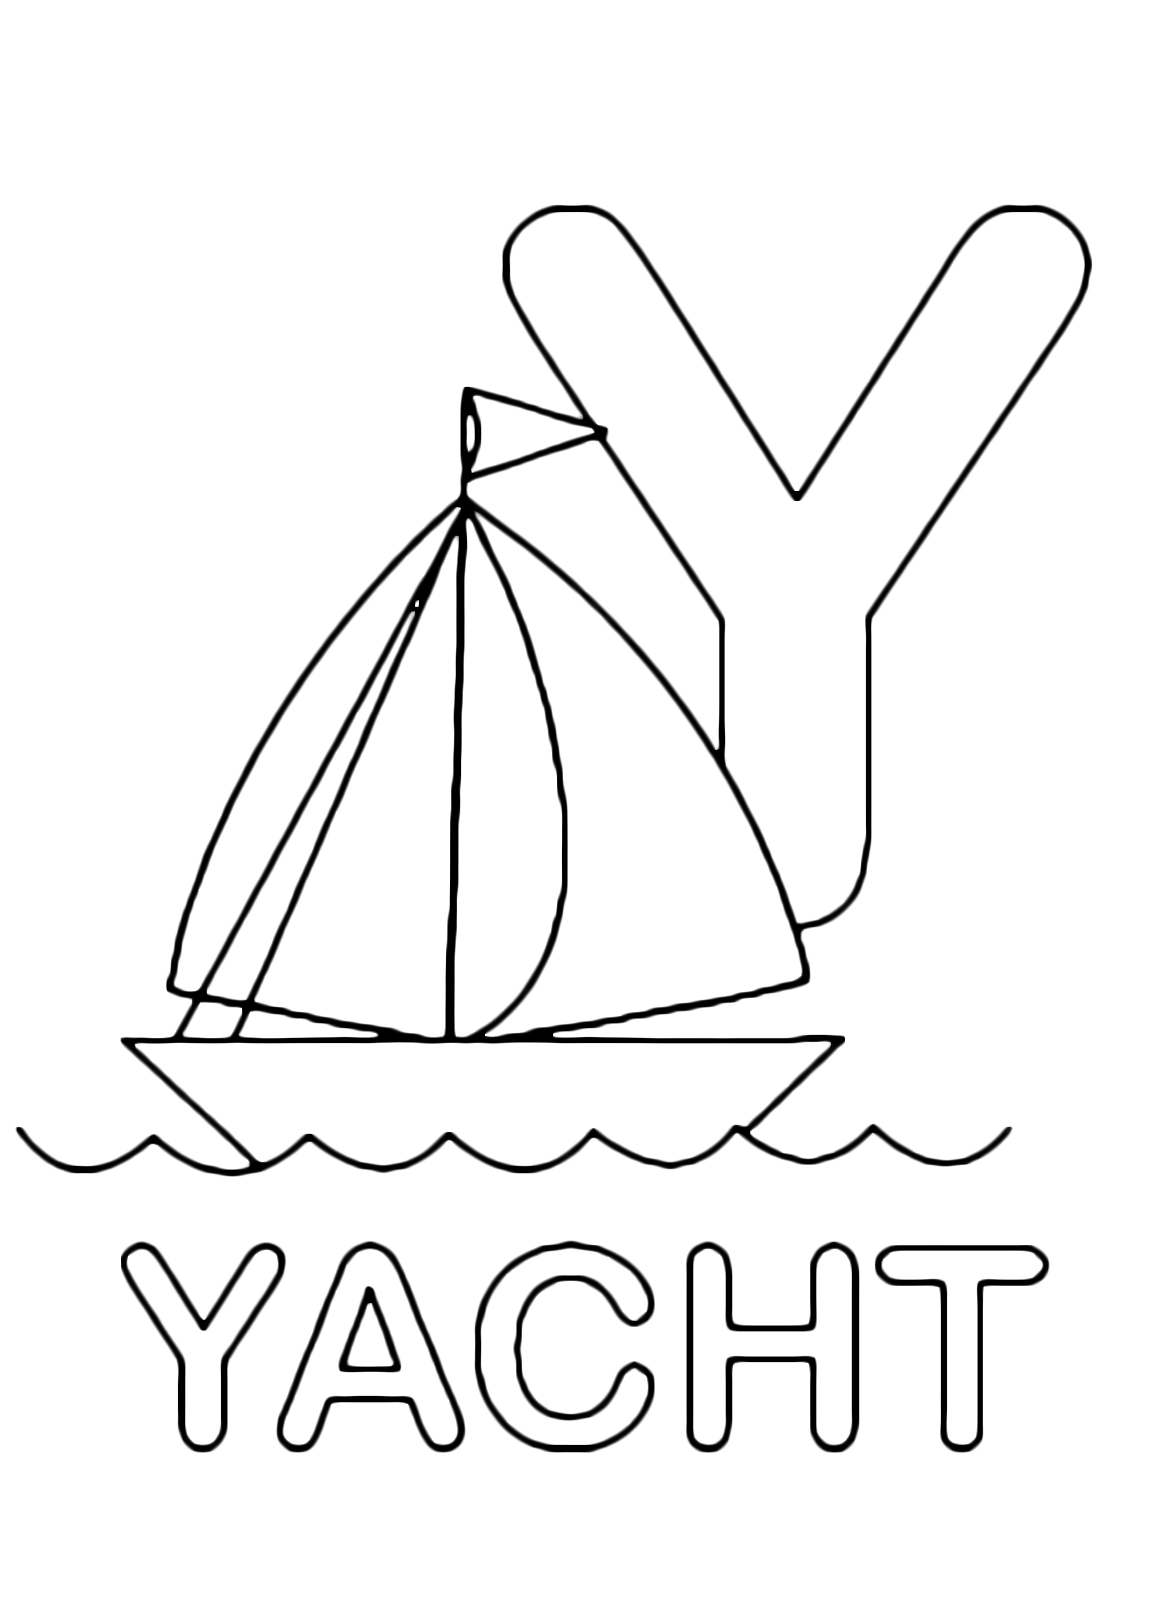 Letters and numbers - Y for yacht uppercase letter